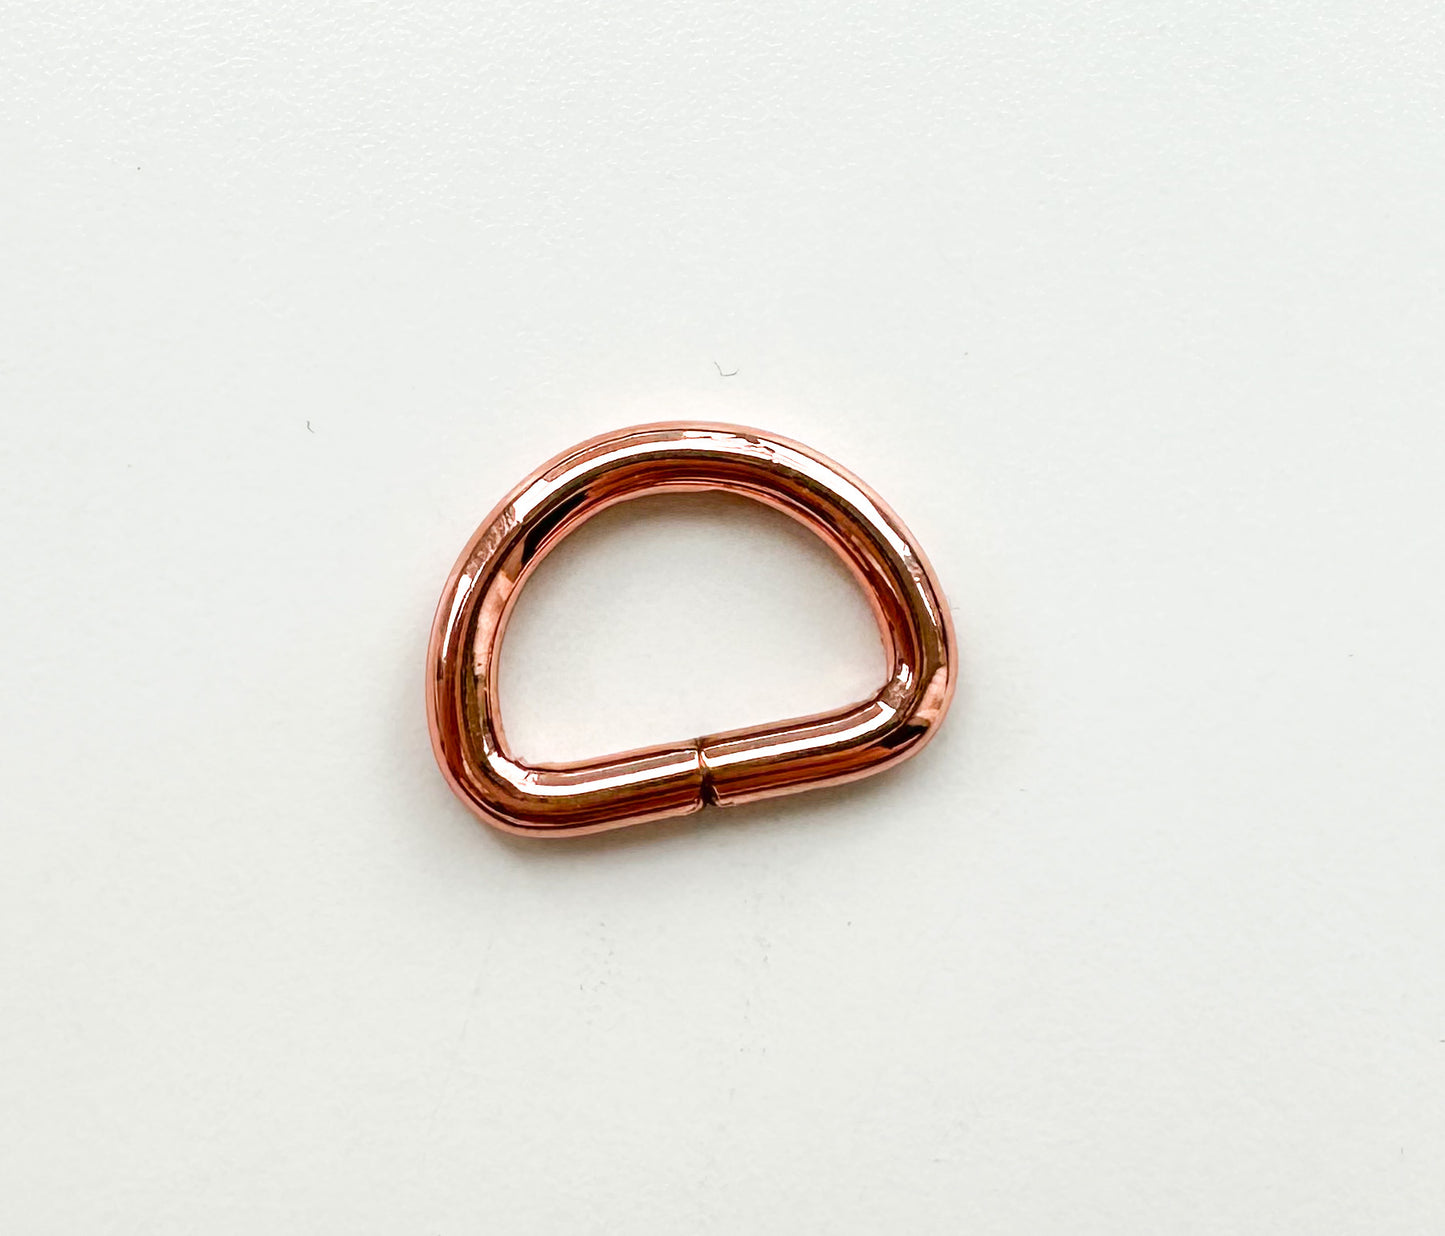 D-ring size: 3/4” (20mm)